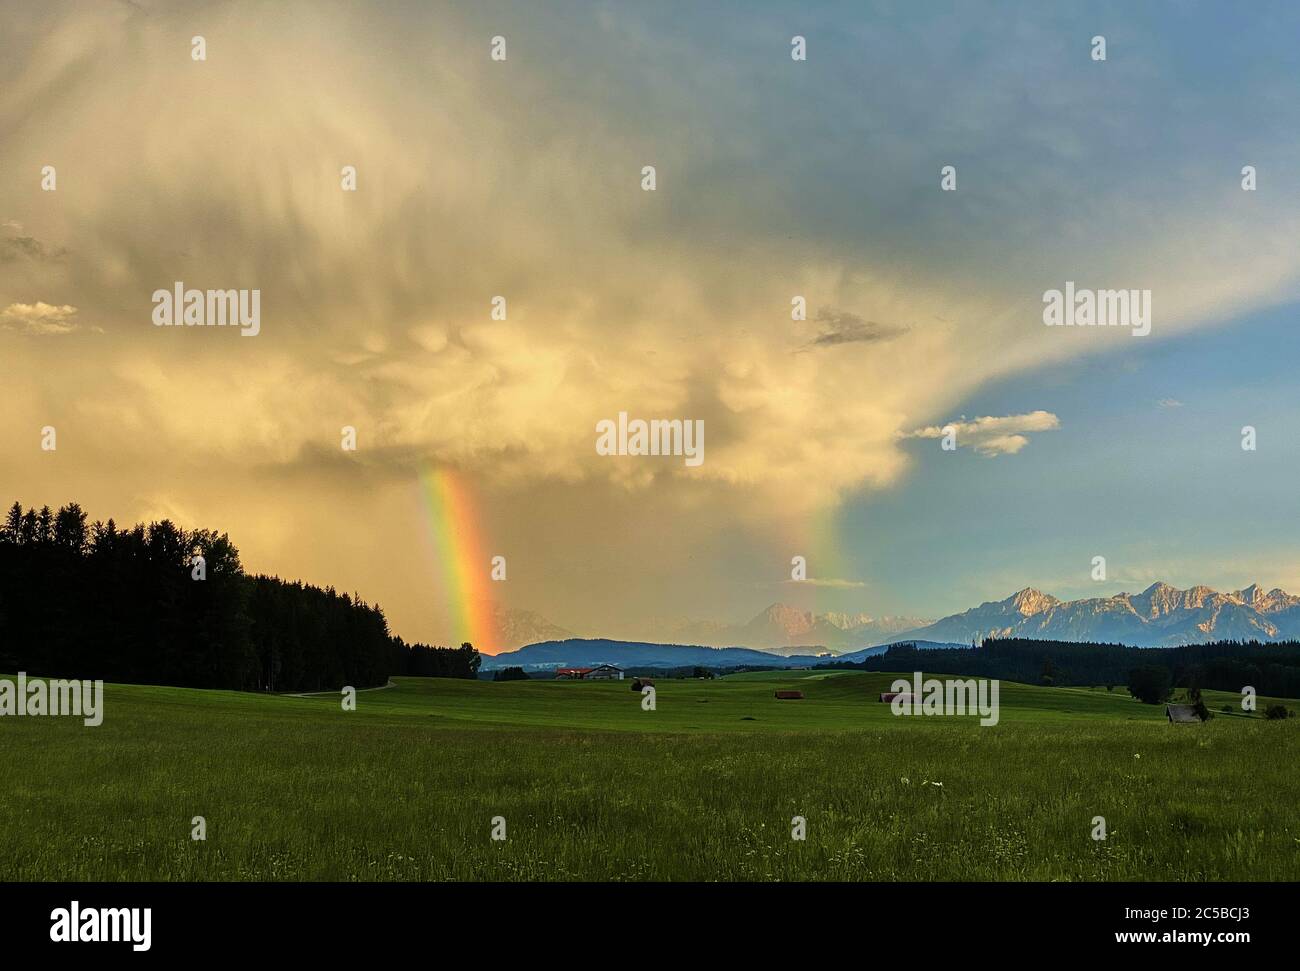 Marktoberdorf, Germany, July 01, 2020.  Stormy weather with heavy rain changes with sunset and rainbow. © Peter Schatz / Alamy Stock Photos Stock Photo